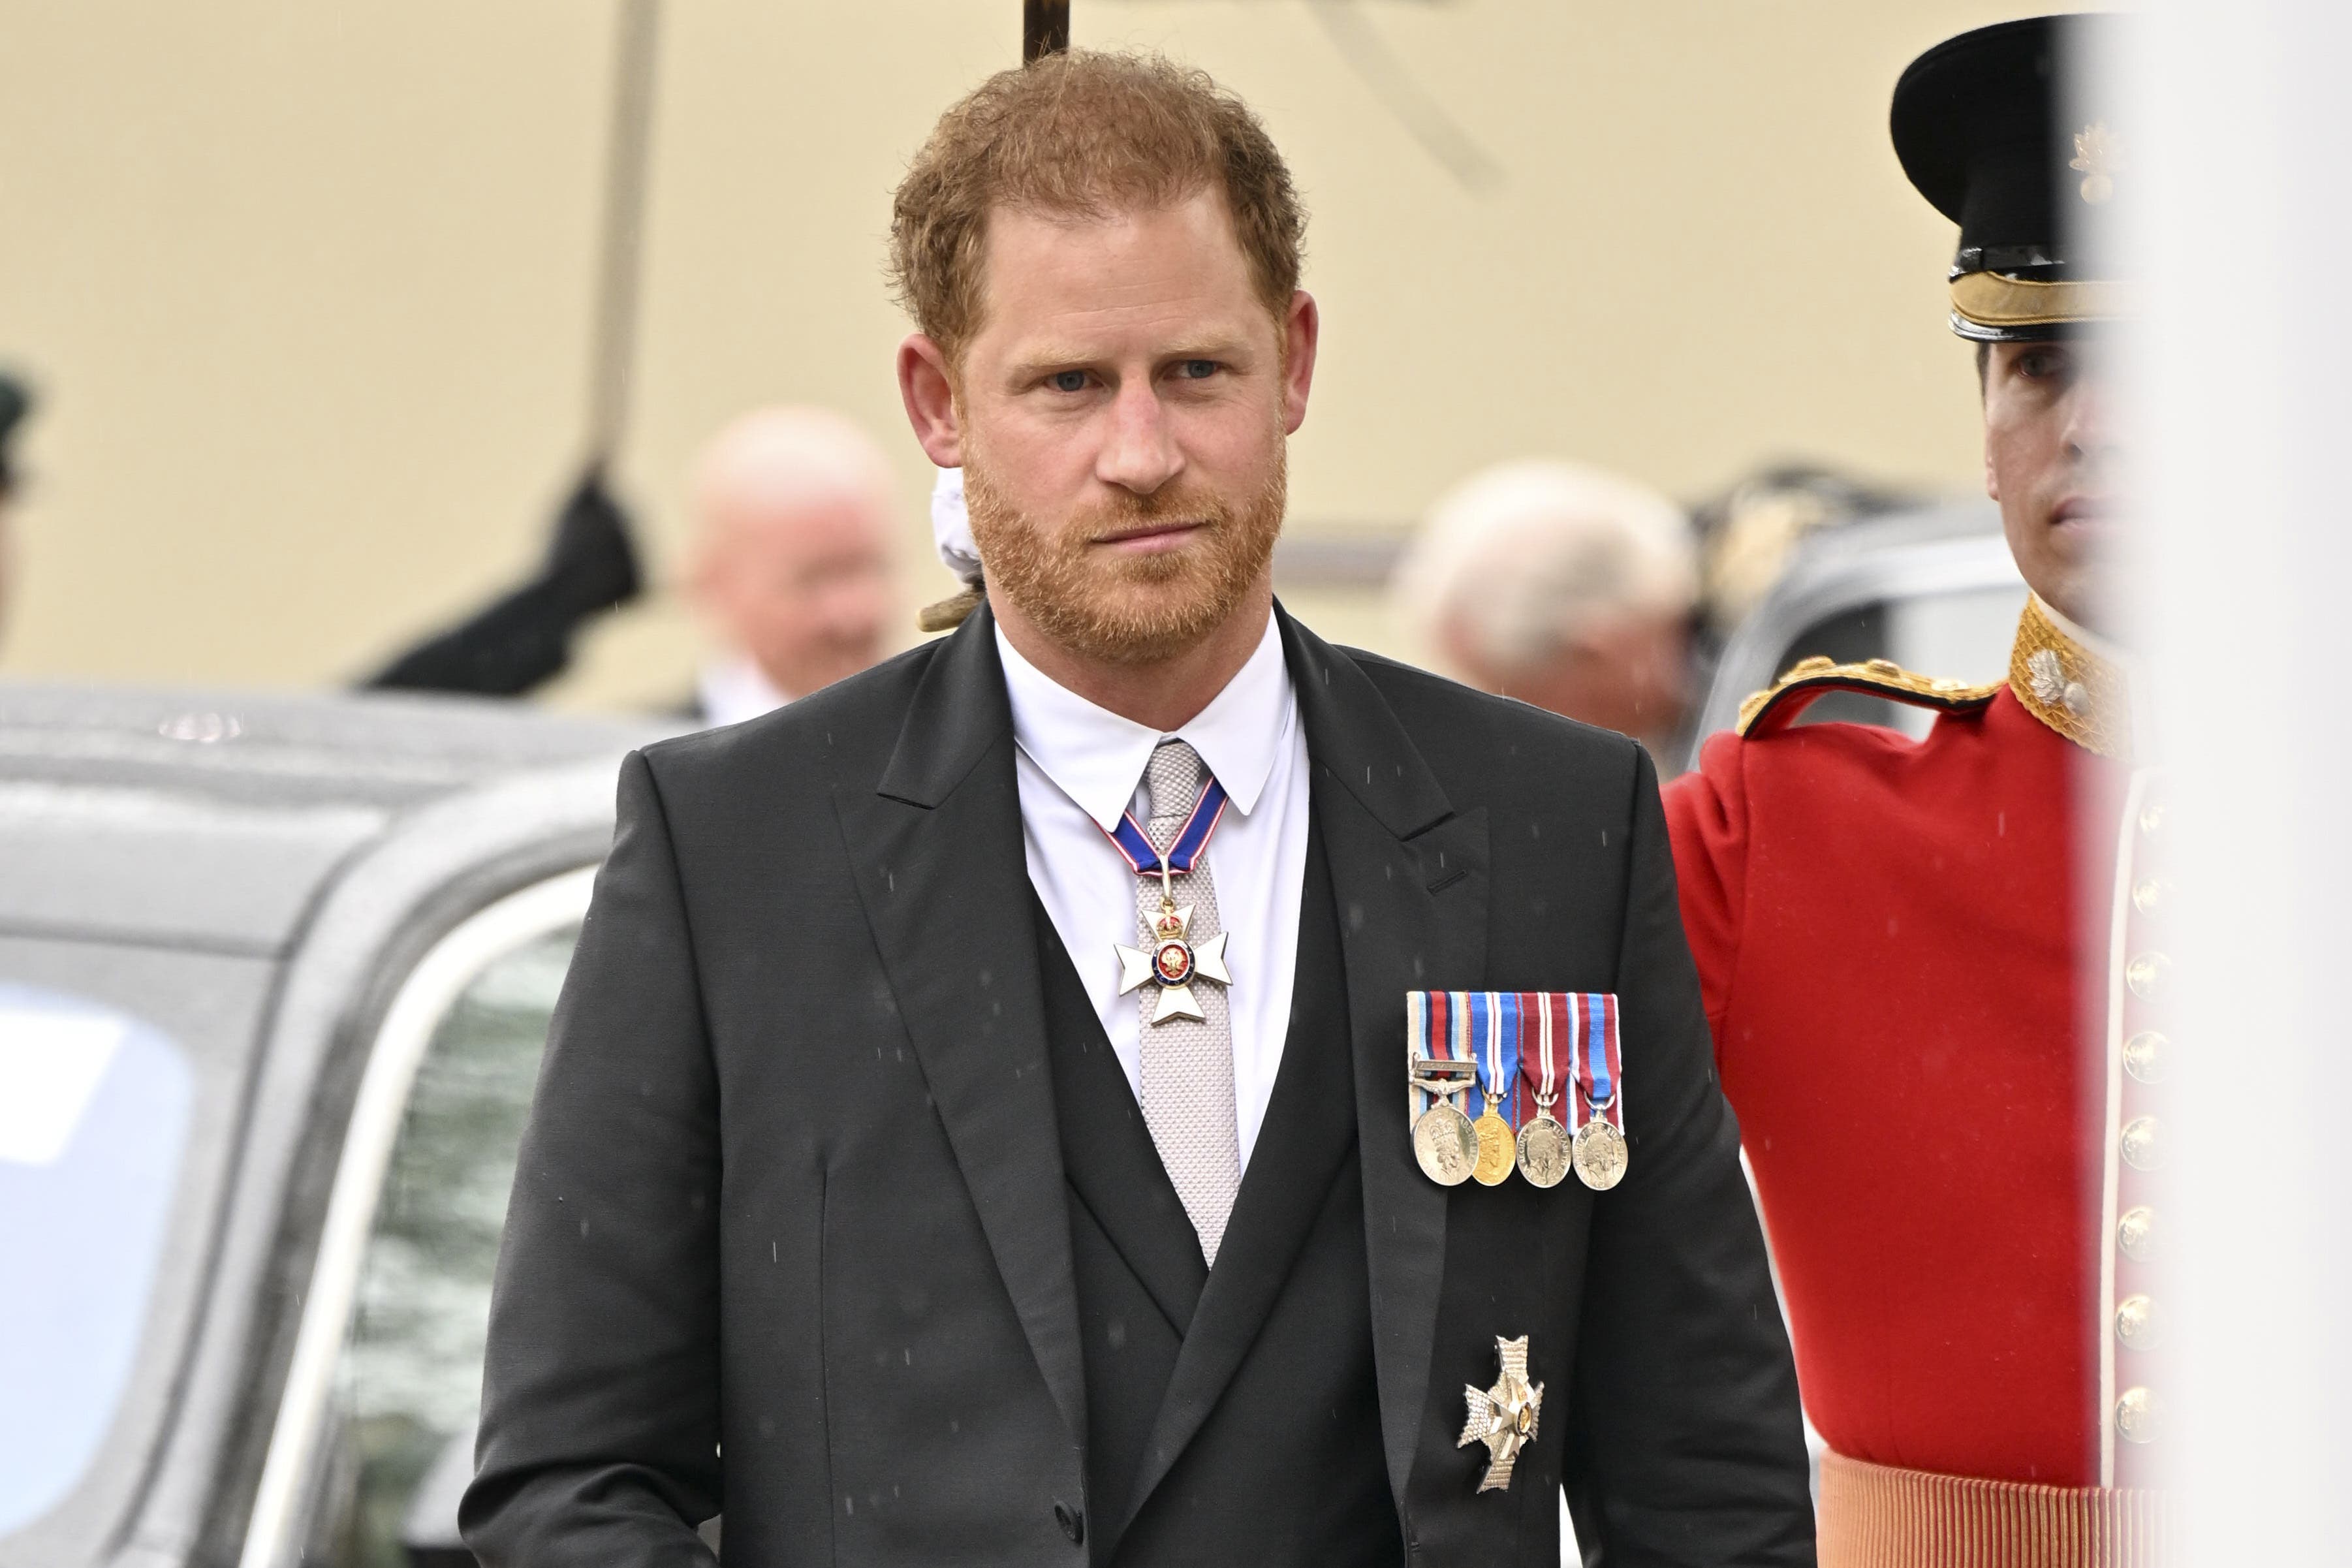 Prince Harry and celebrities have brought a case against Mirror Group Newspapers